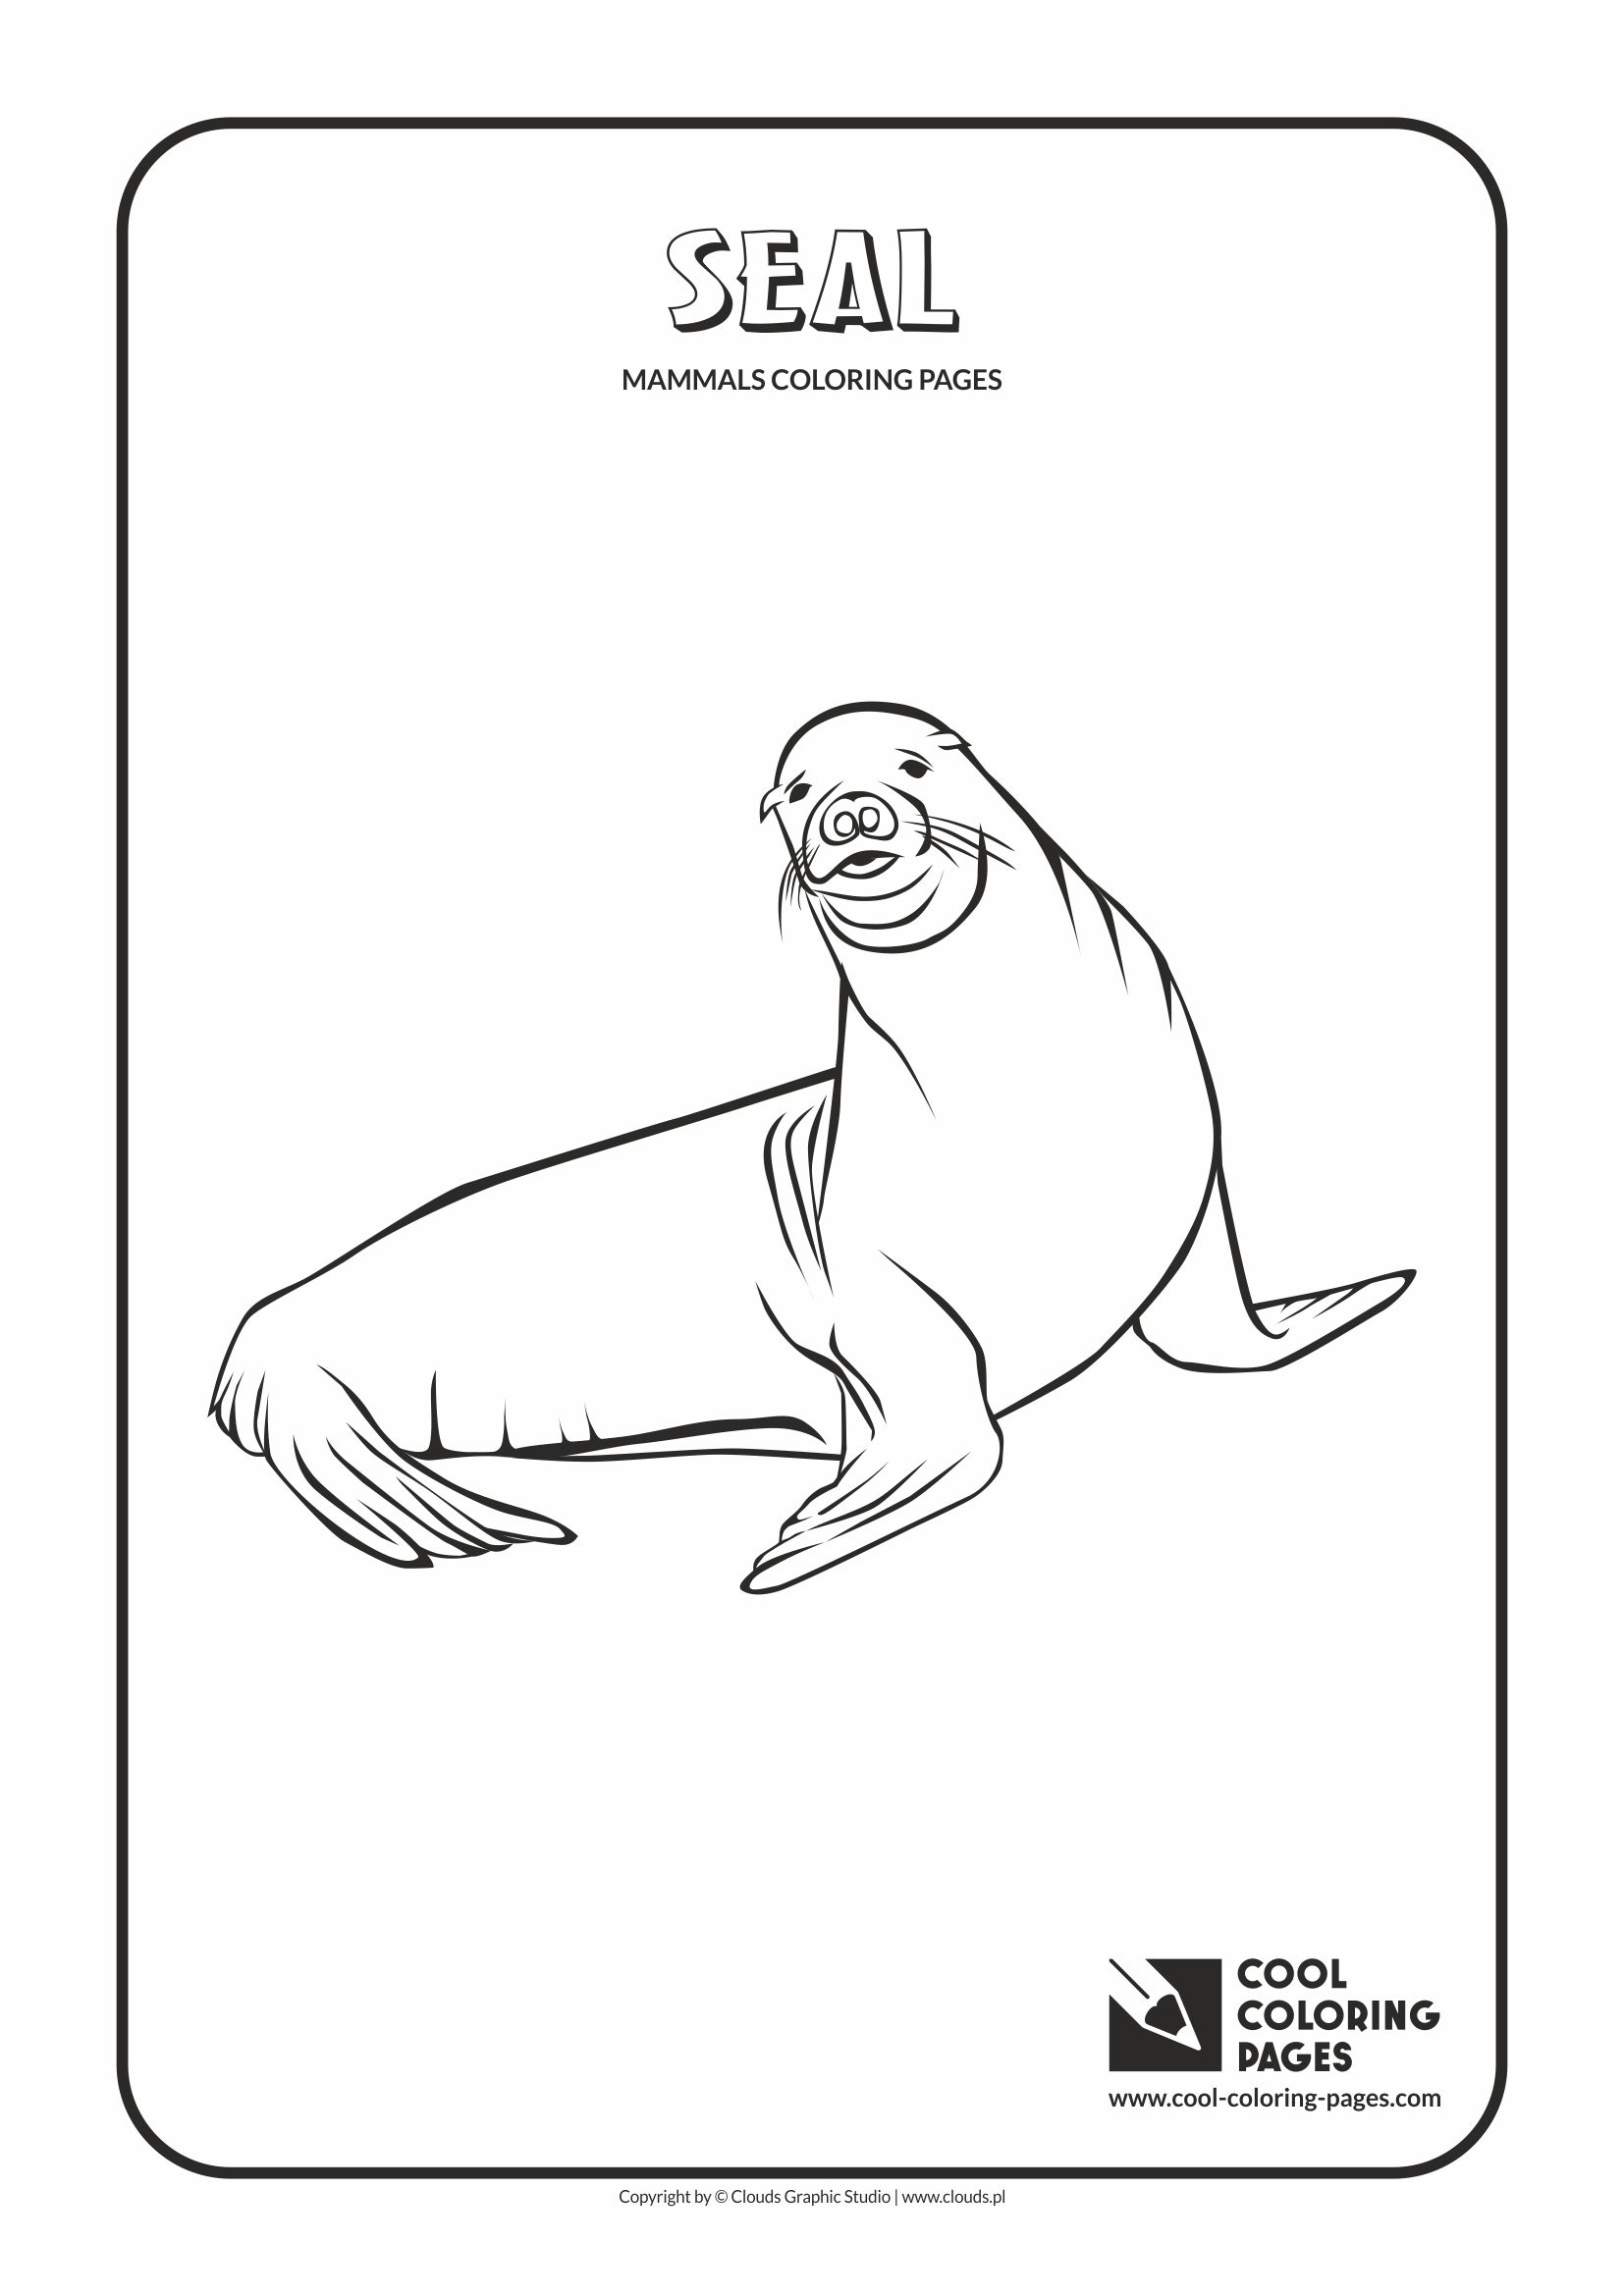 Cool Coloring Pages - Animals / Seal / Coloring page with seal